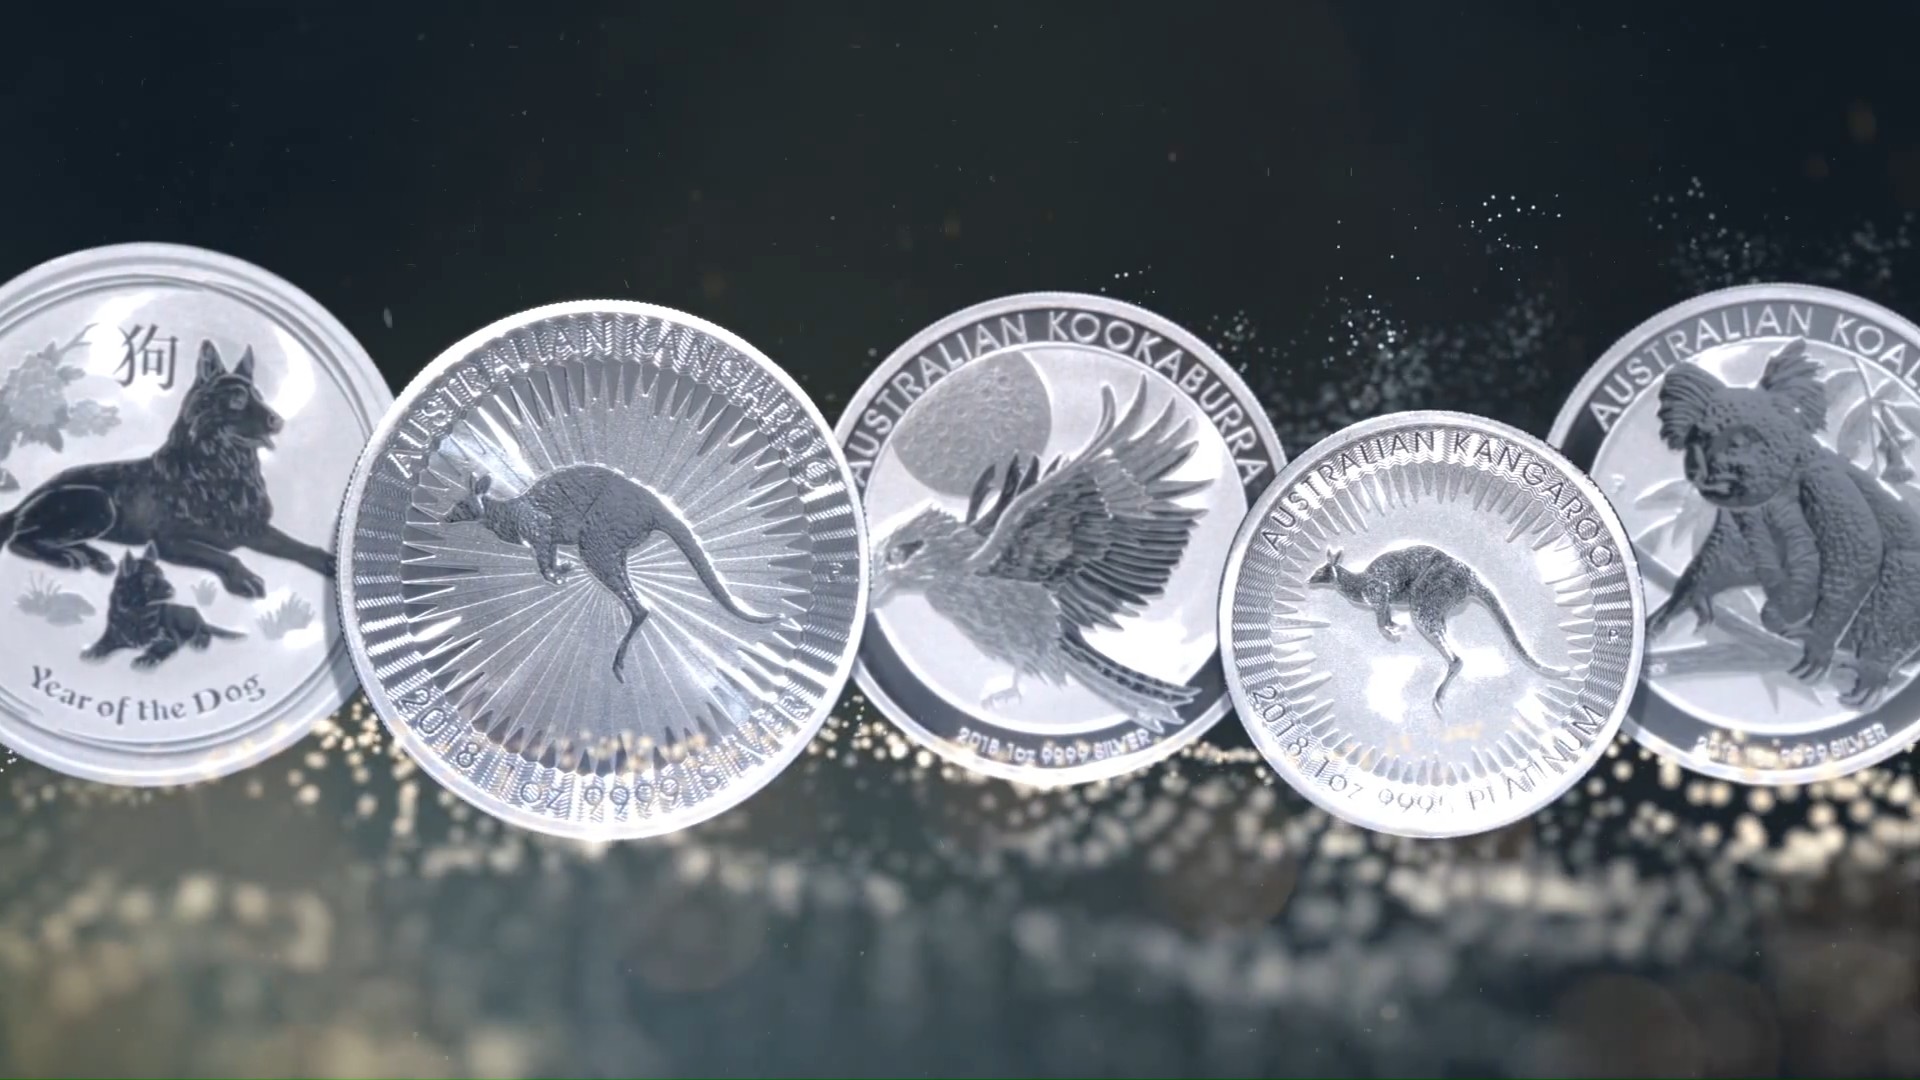 The Perth Mint has now unveiled their 2018 lineup of silver, gold and plati...